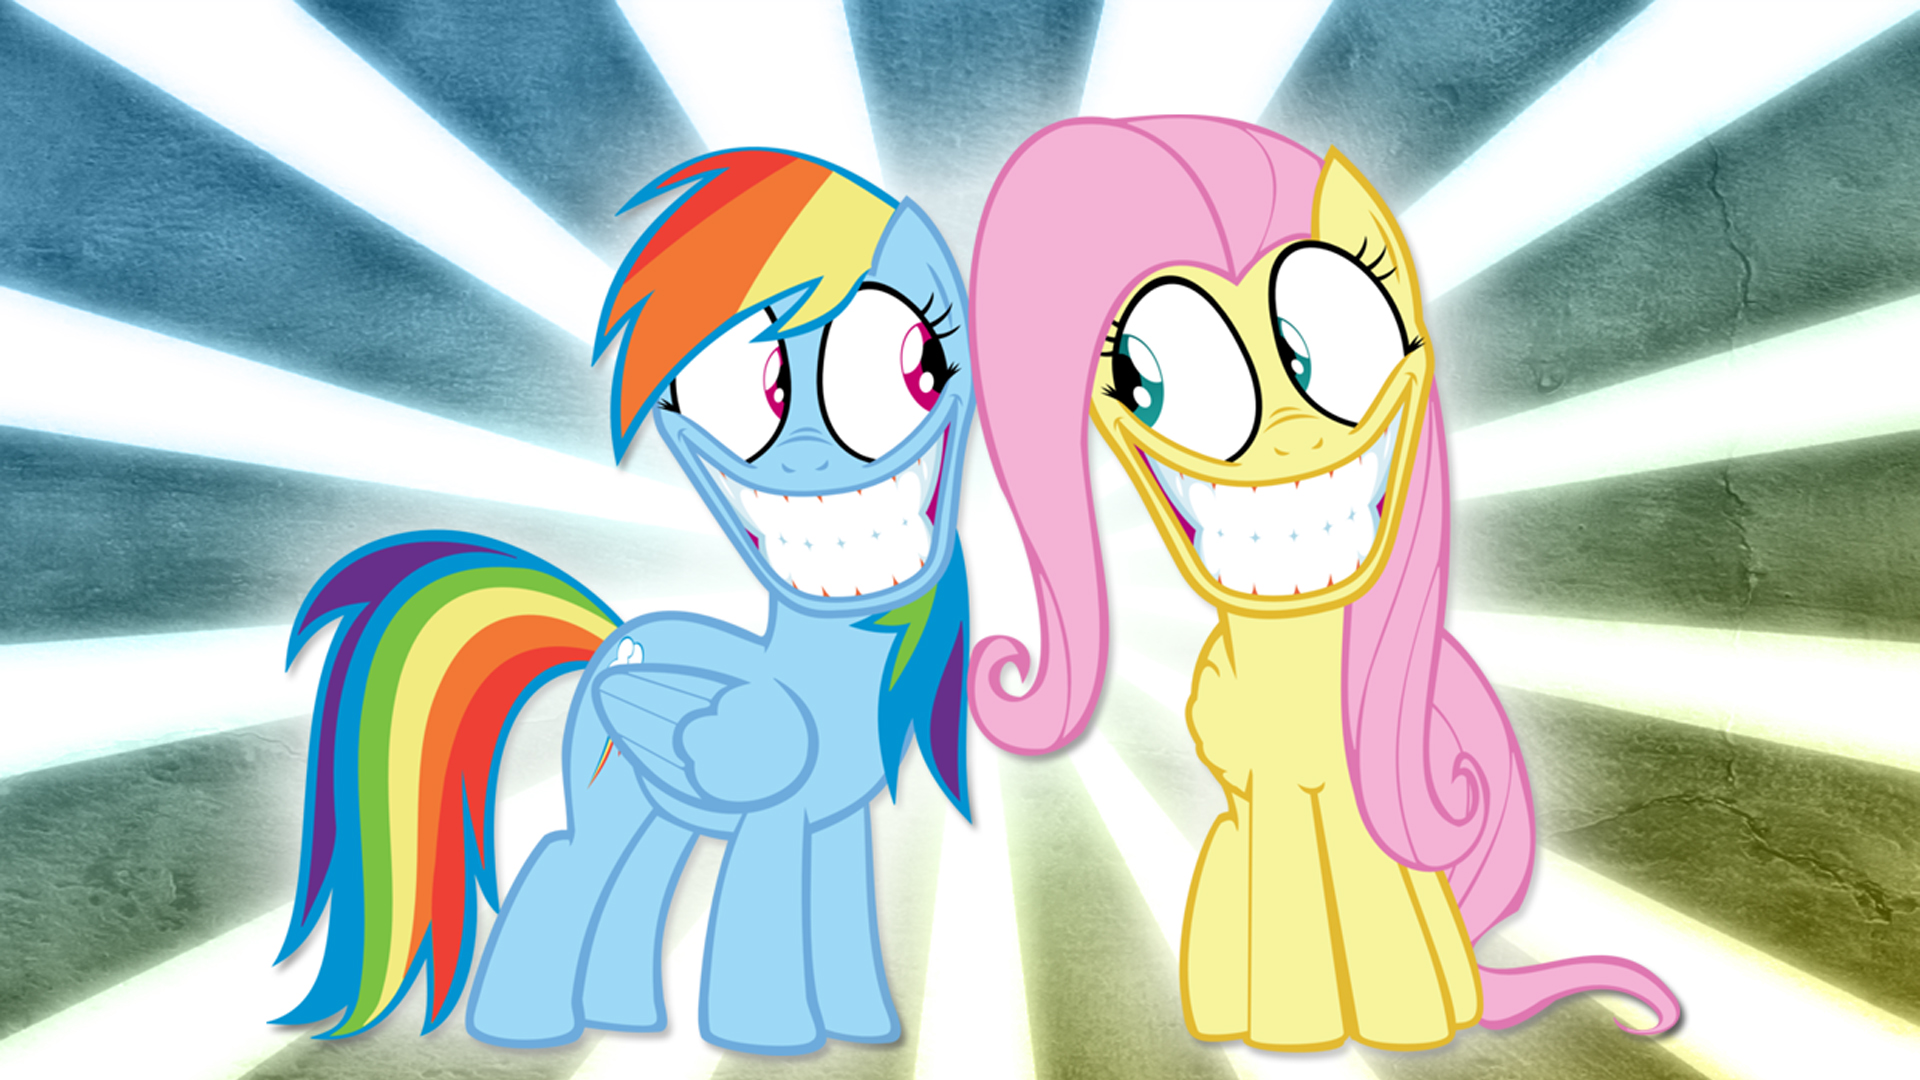 Fluttershy and Rainbow Dash Wallpaper by Ookami-95 and TygerxL